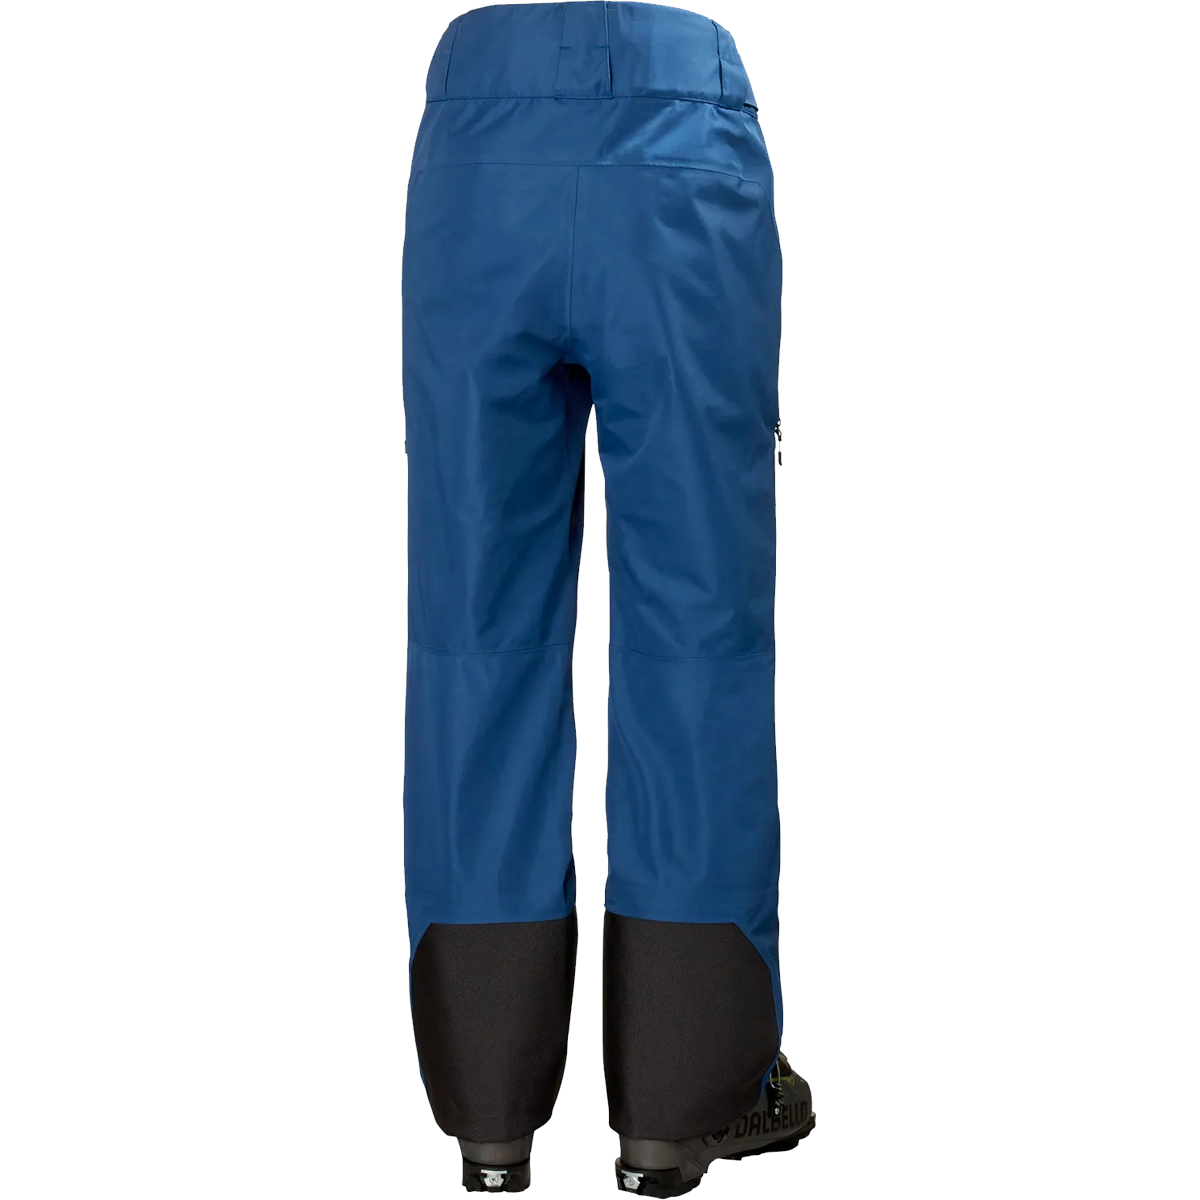 Men's Elevation Infinity Shell 2.0 Pant alternate view